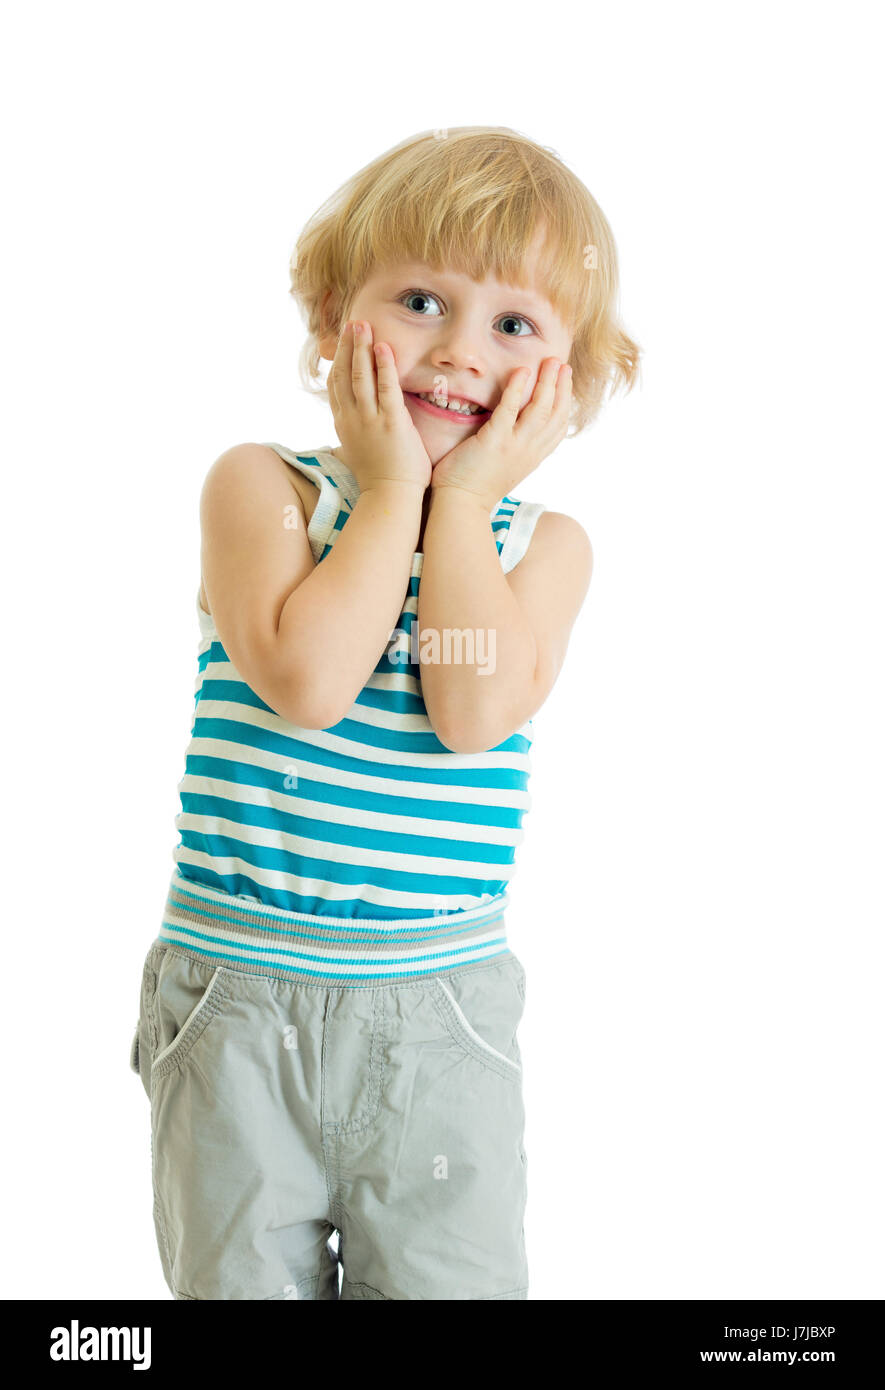 Surprised little boy with hands on cheeks over white background Stock Photo